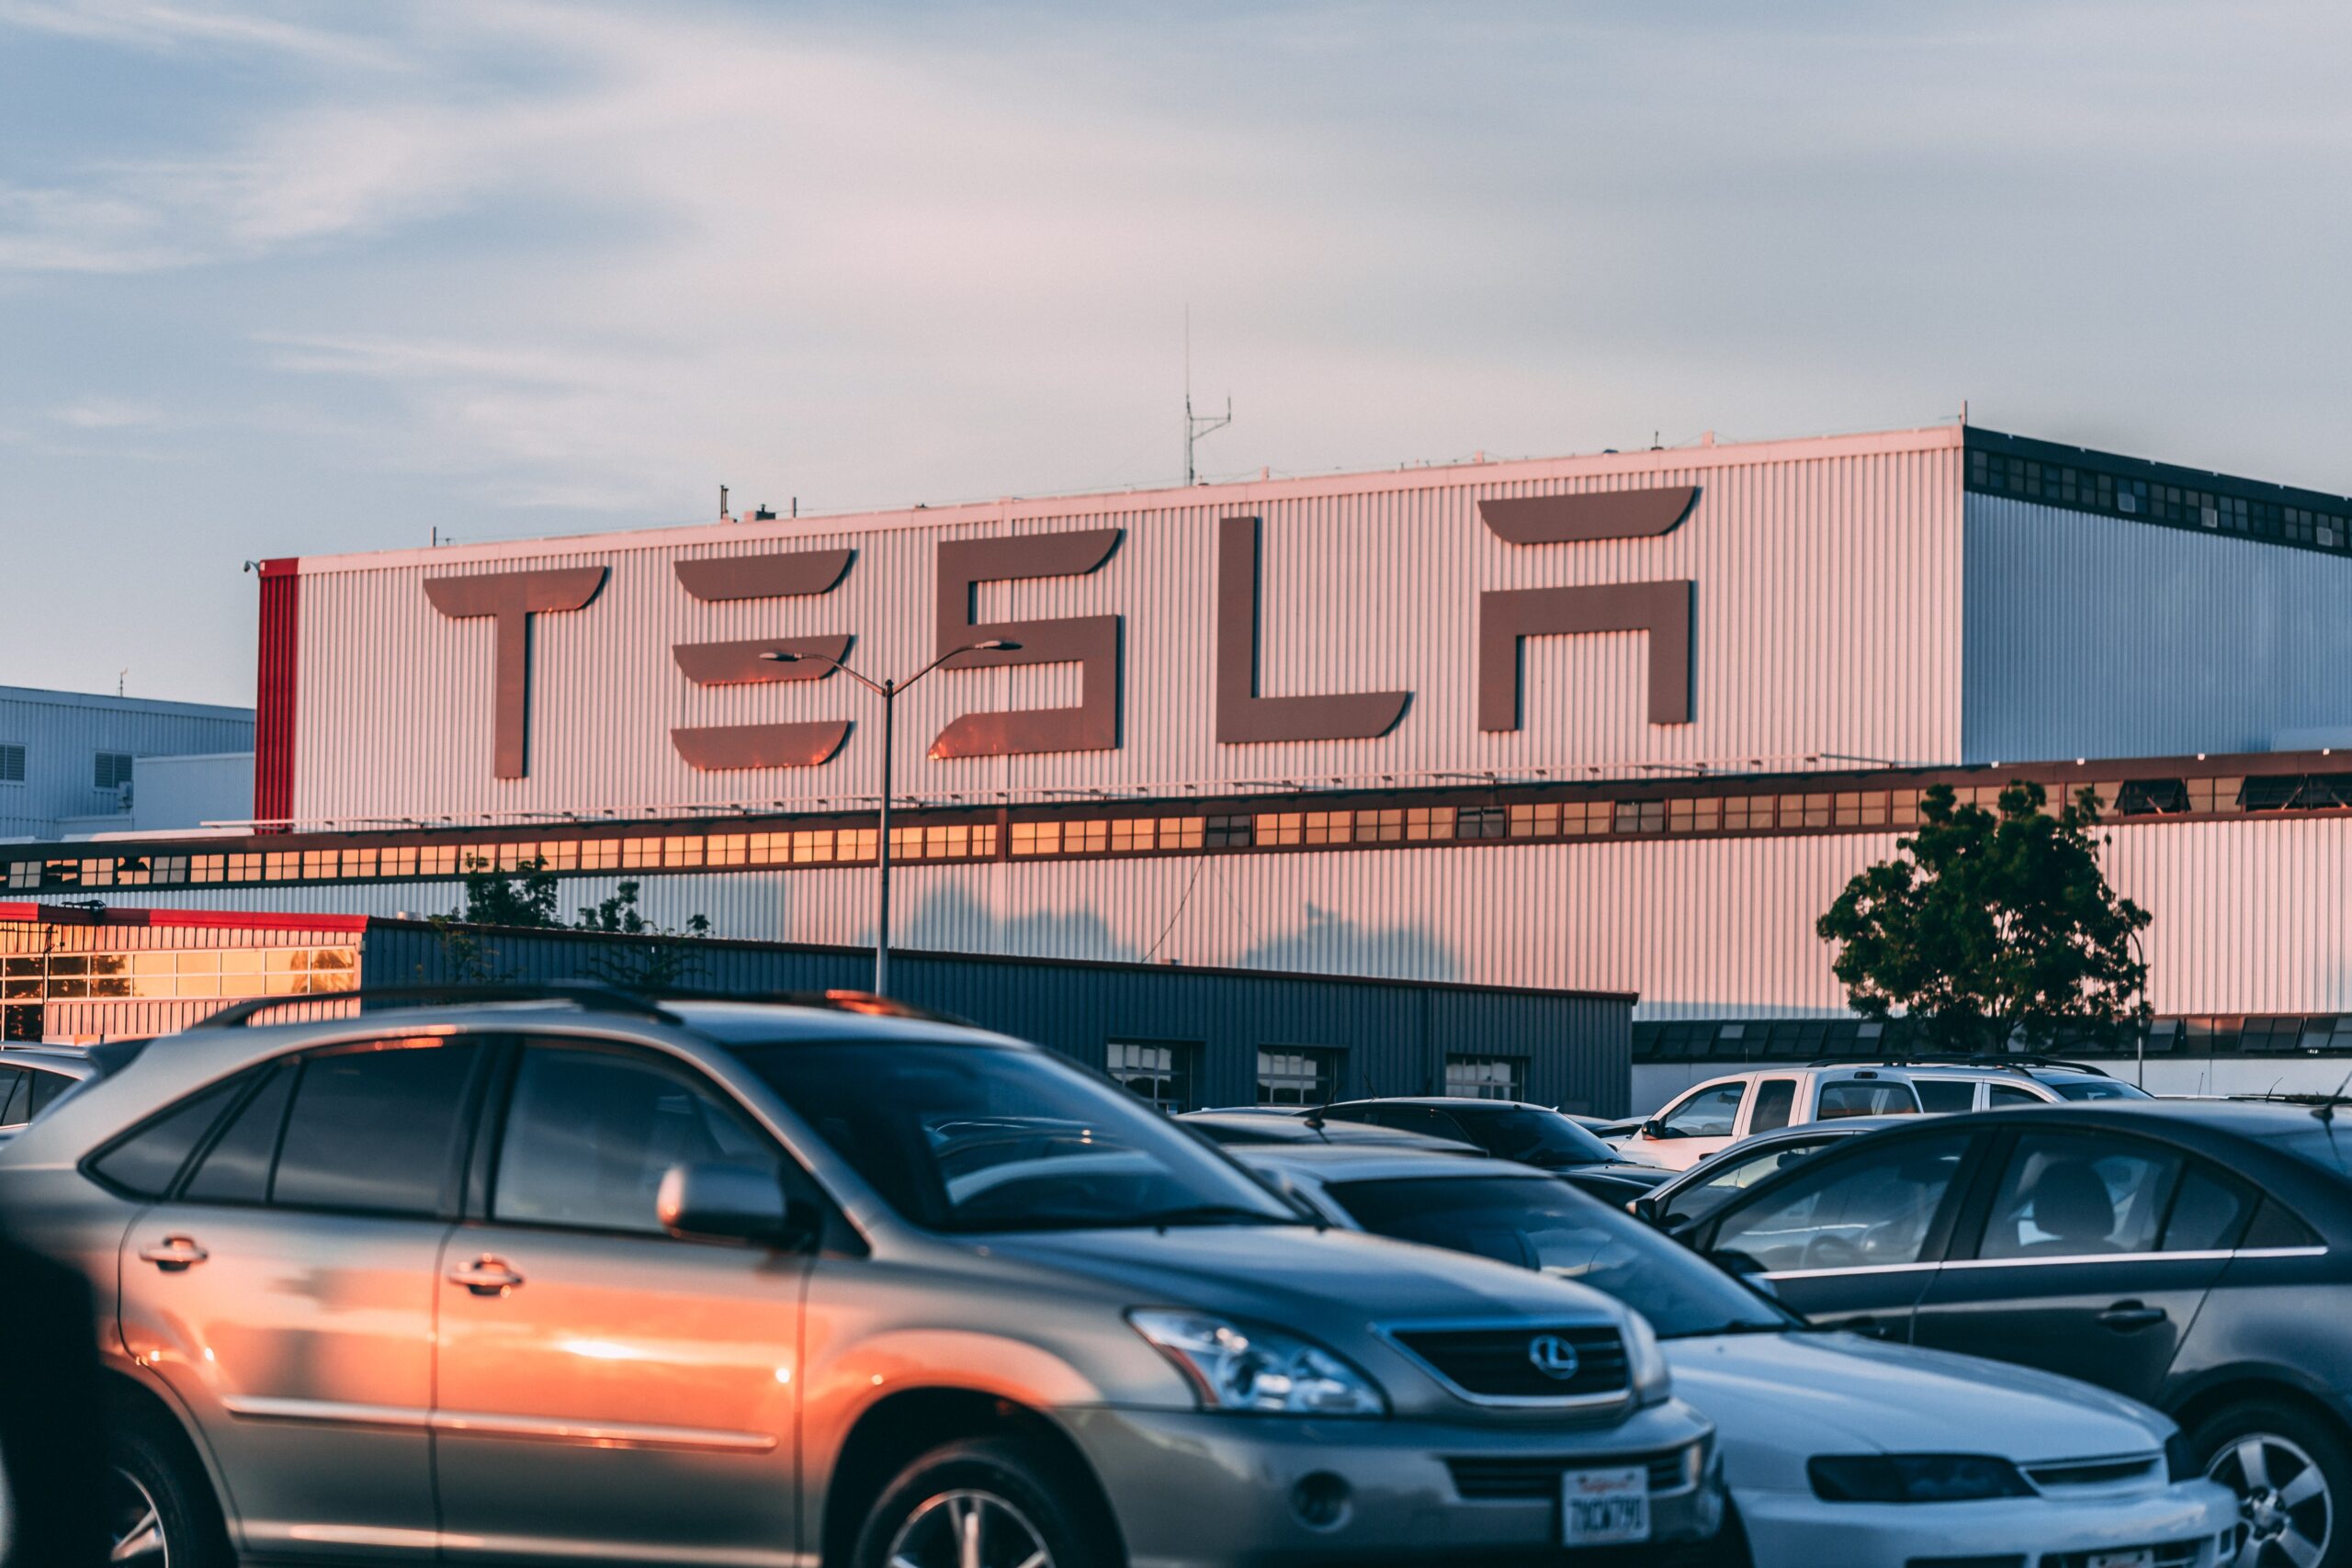 Design flaw causes accidental purchase of 28 Tesla's cars